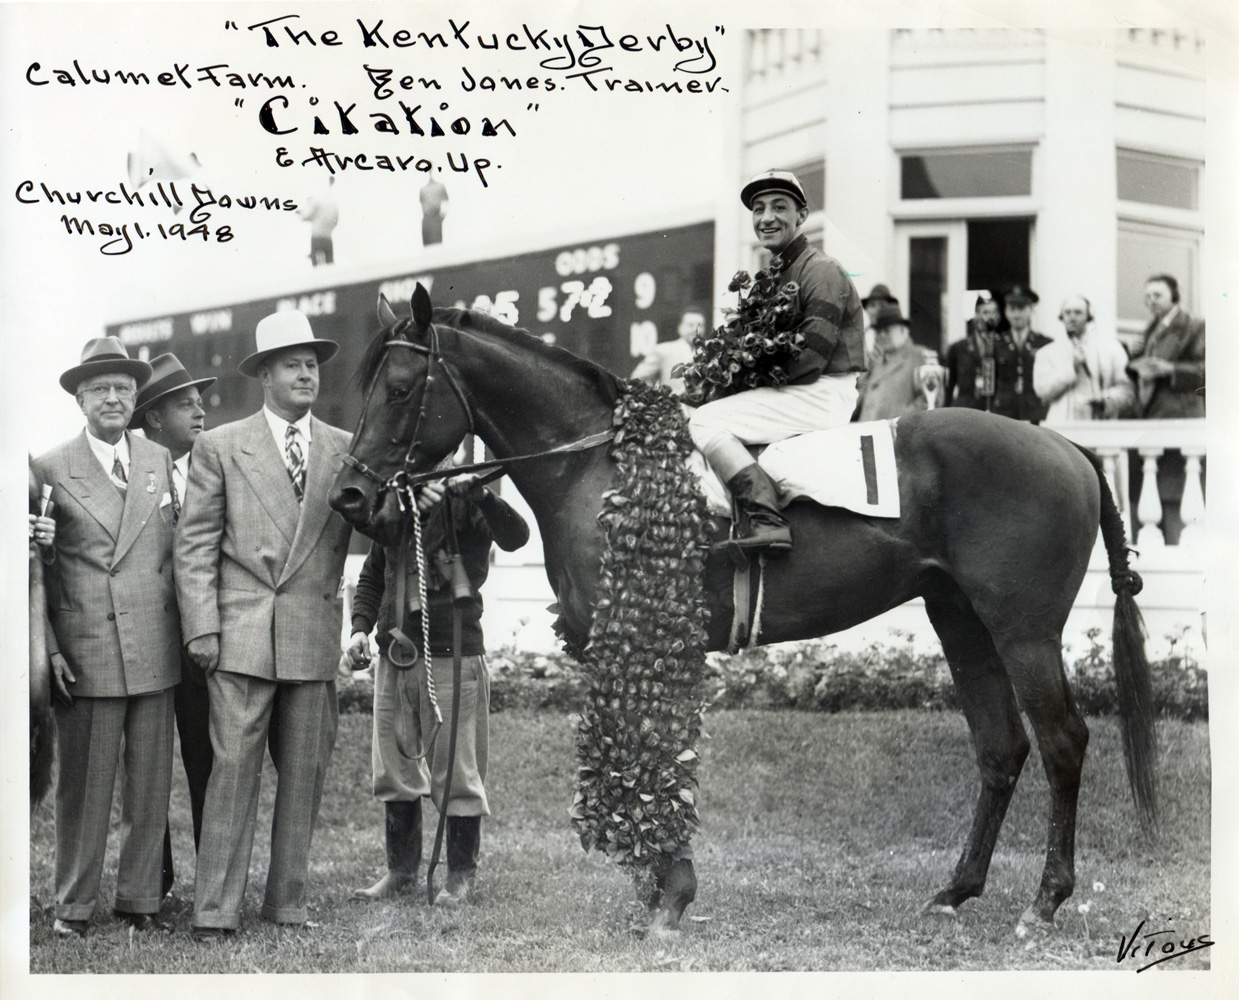 Ben Jones in the winner's circle for the 1948 Kentucky Derby, won by Citation. (His son, Jimmy Jones, would become the trainer of record for the last two legs of the Triple Crown) (Jerry Vitous/Museum Collection)